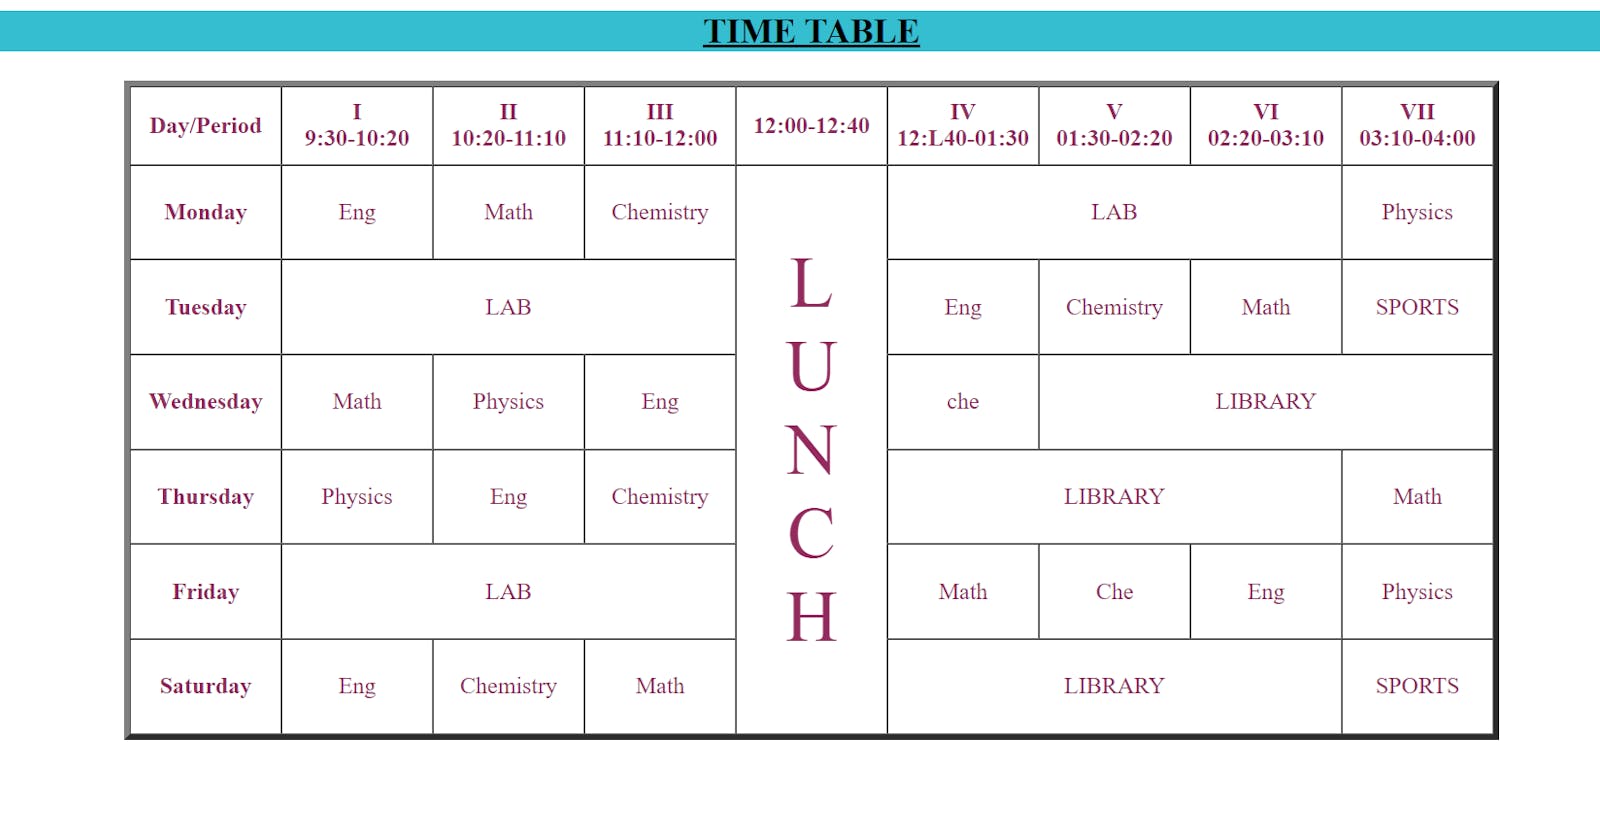 This is time table that I made .